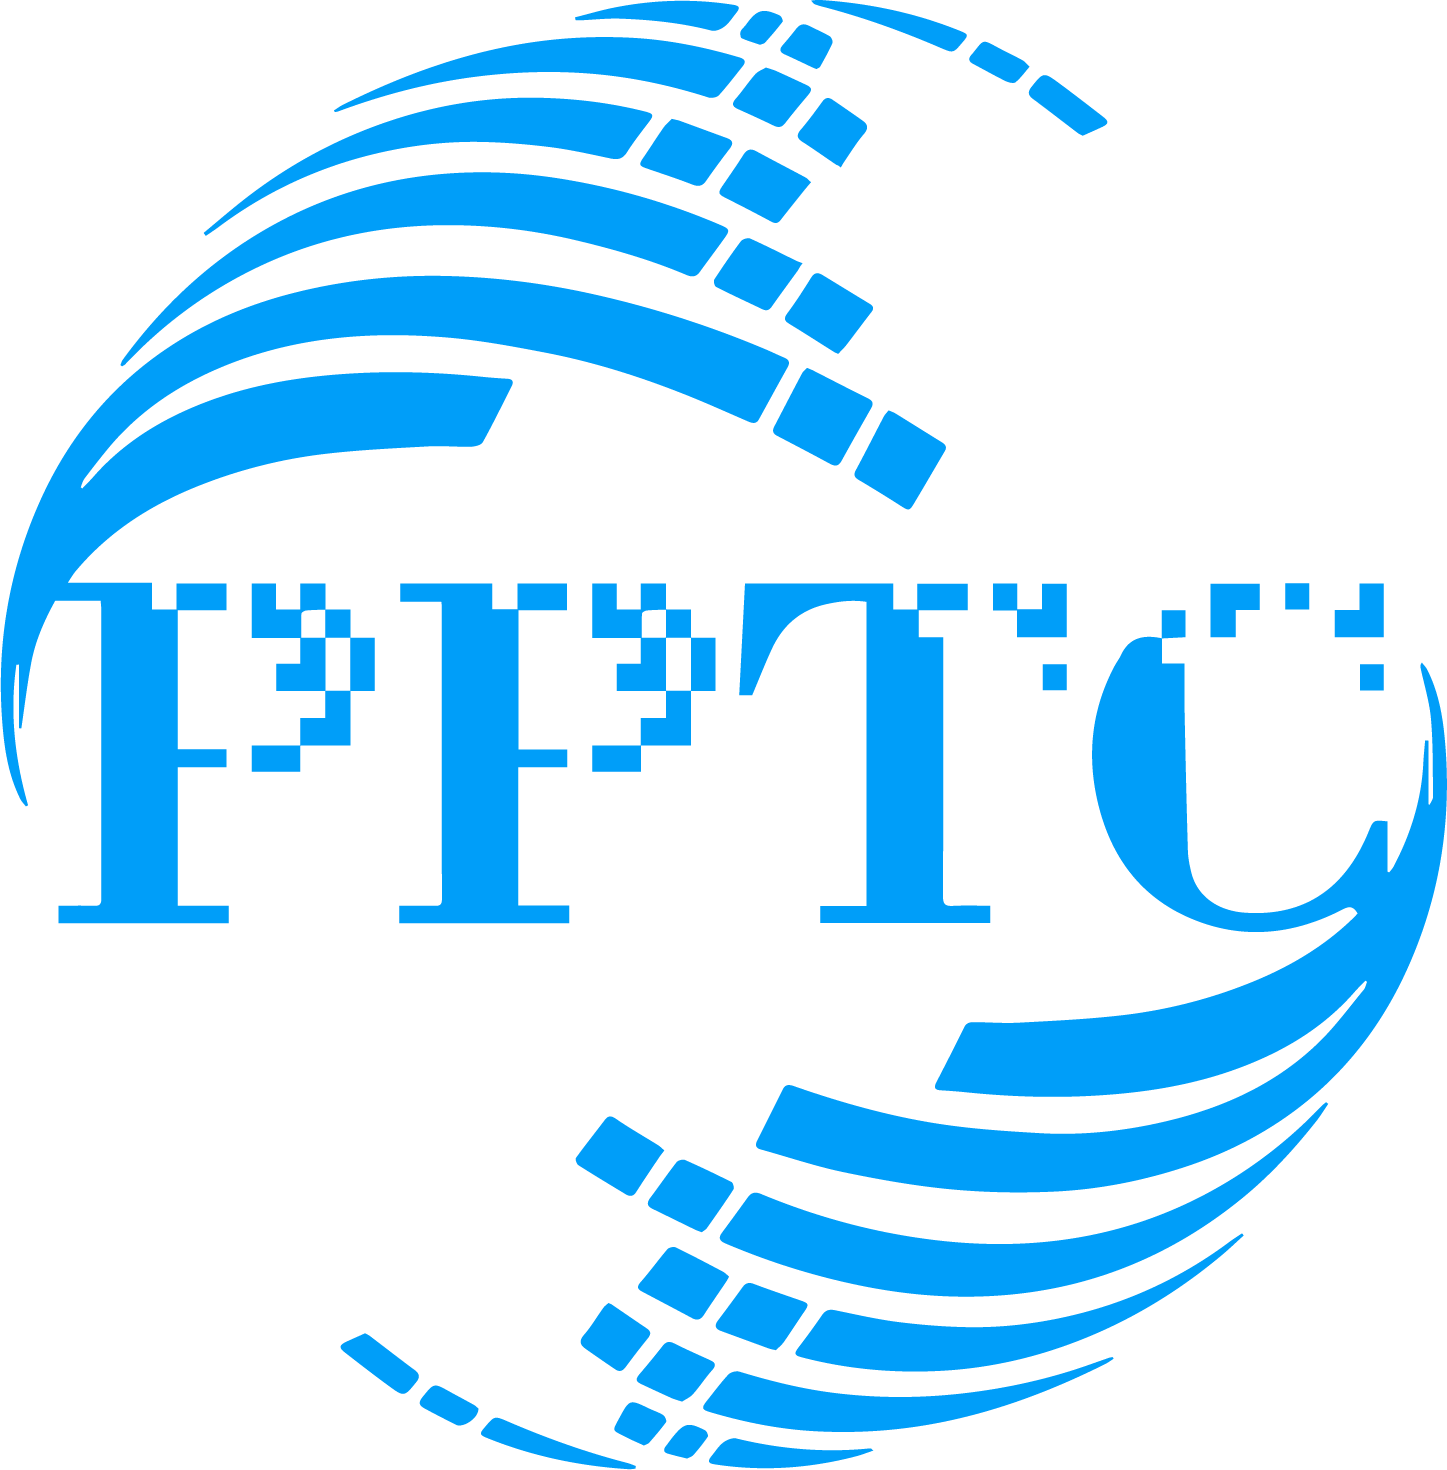 Company logo for Pptc Technology Services Pte. Ltd.